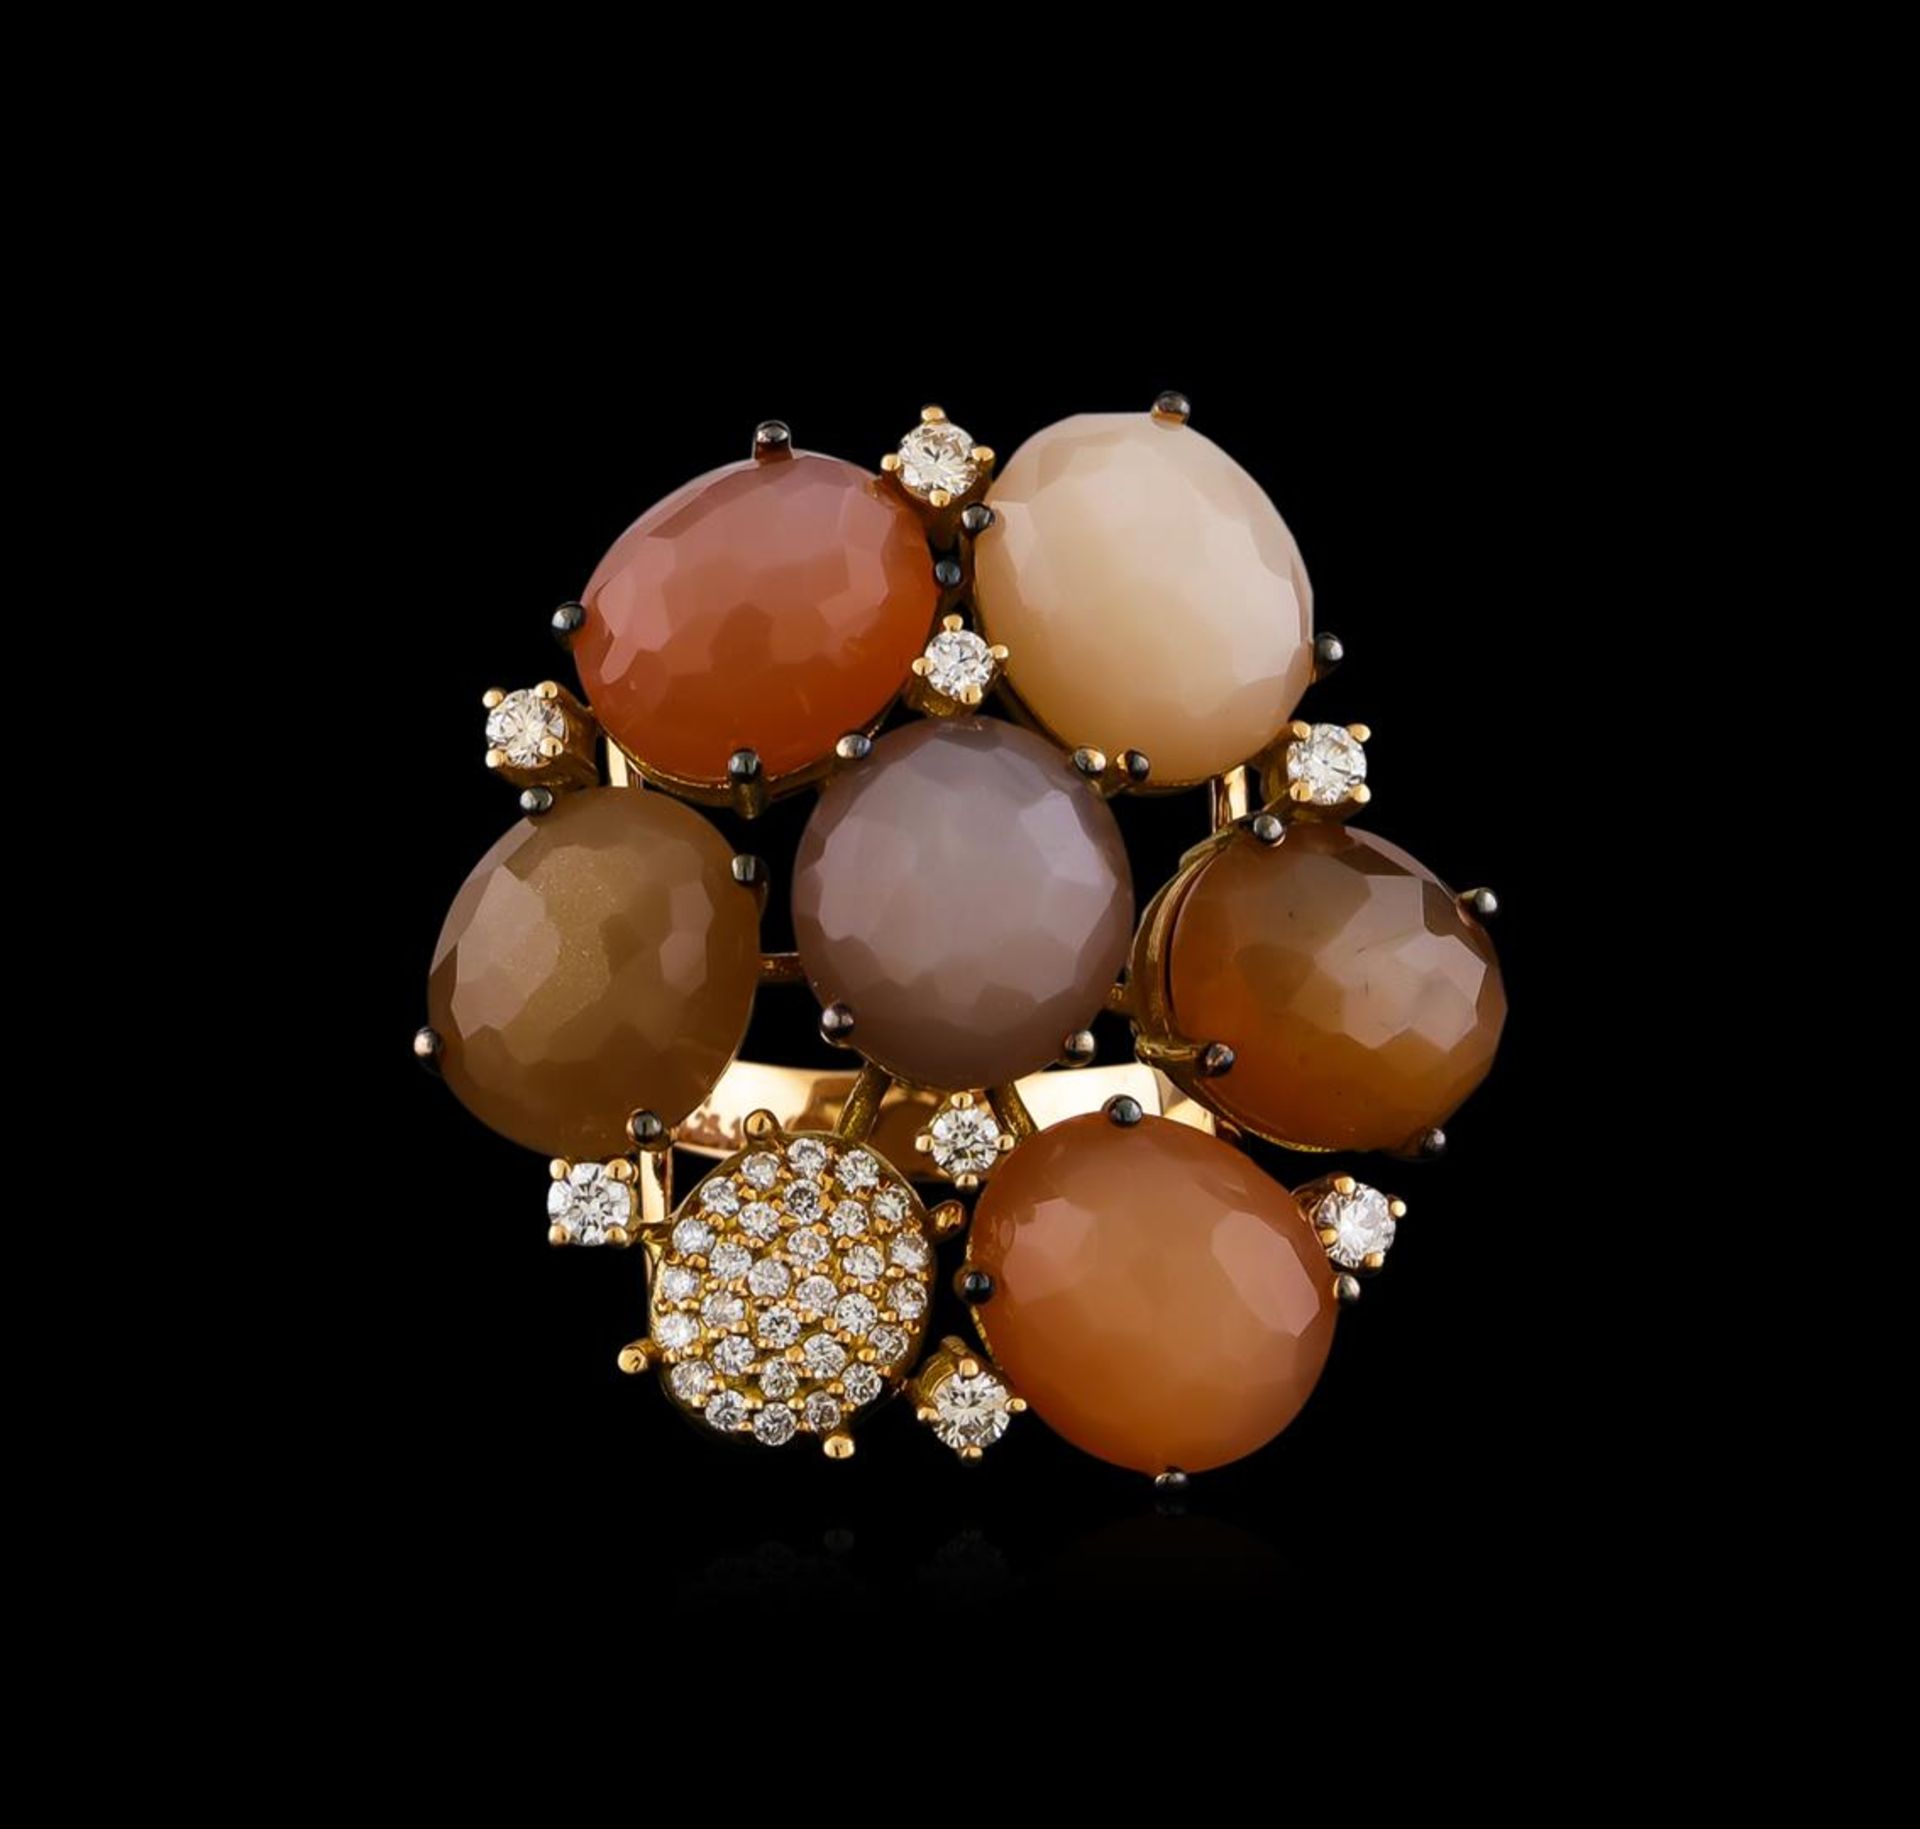 25.14 ctw Sunstone and Diamond Ring - 18KT Yellow Gold - Image 2 of 5